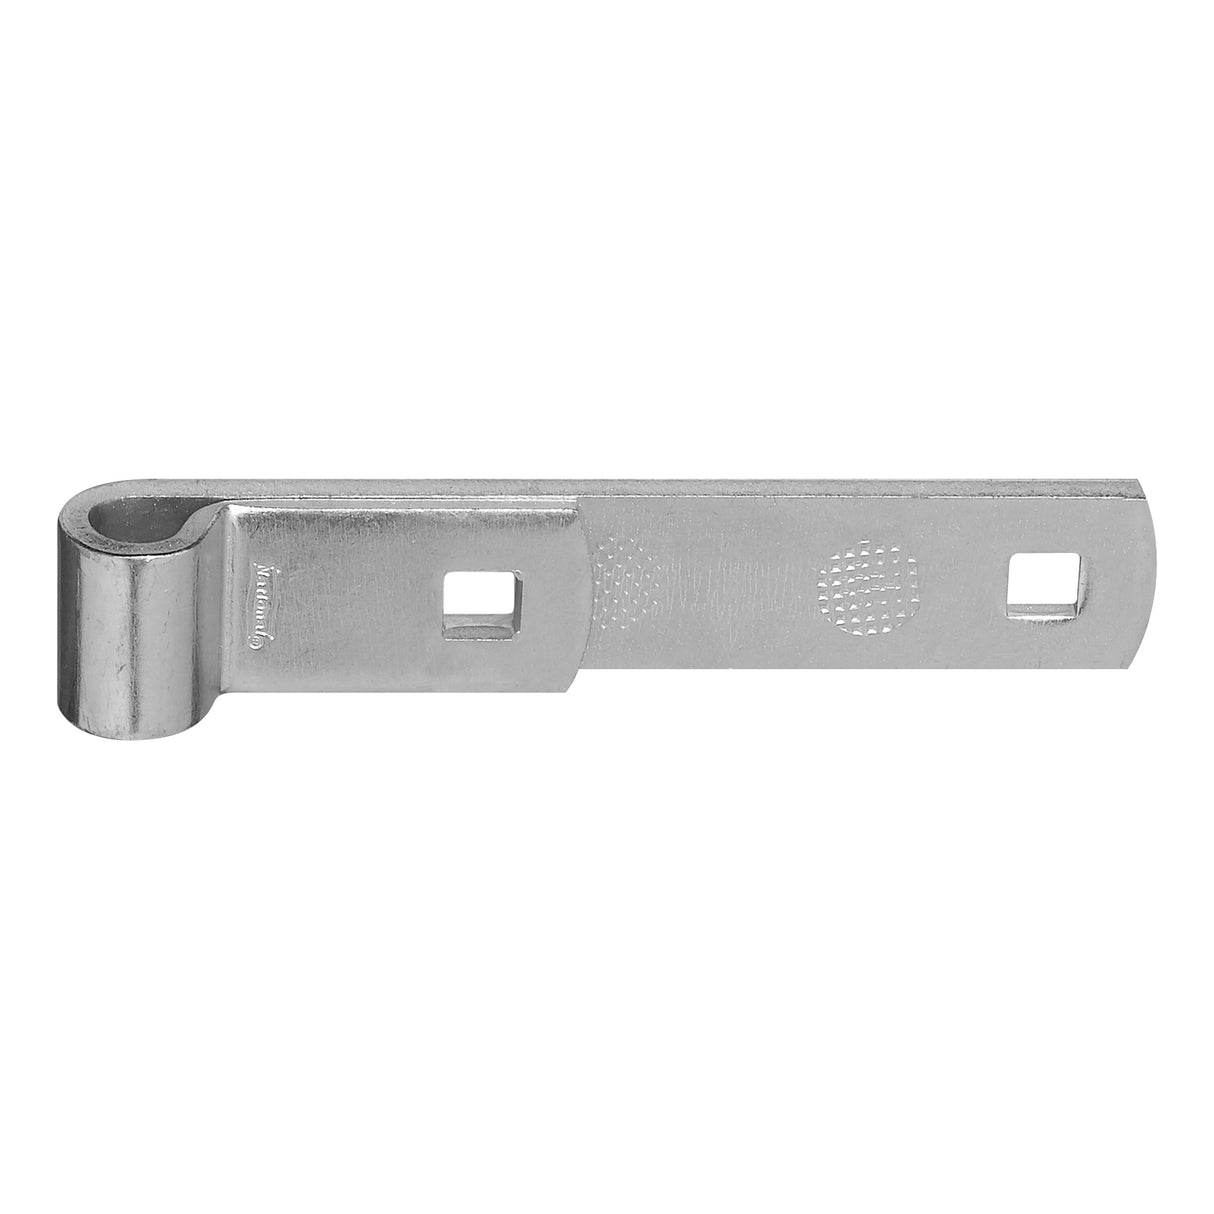 Strap for Pintle Hinge Systems